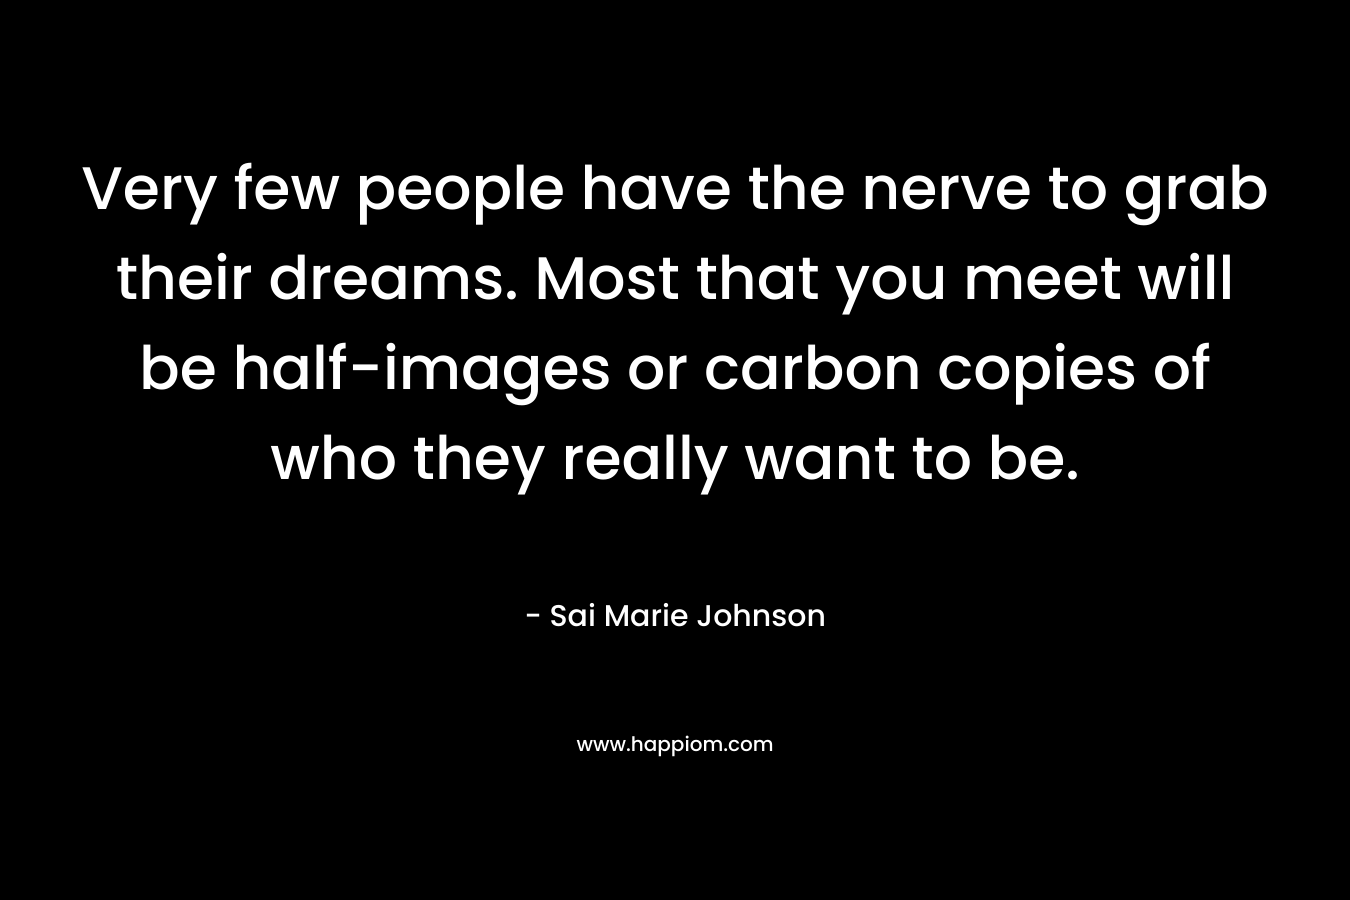 Very few people have the nerve to grab their dreams. Most that you meet will be half-images or carbon copies of who they really want to be. – Sai Marie Johnson